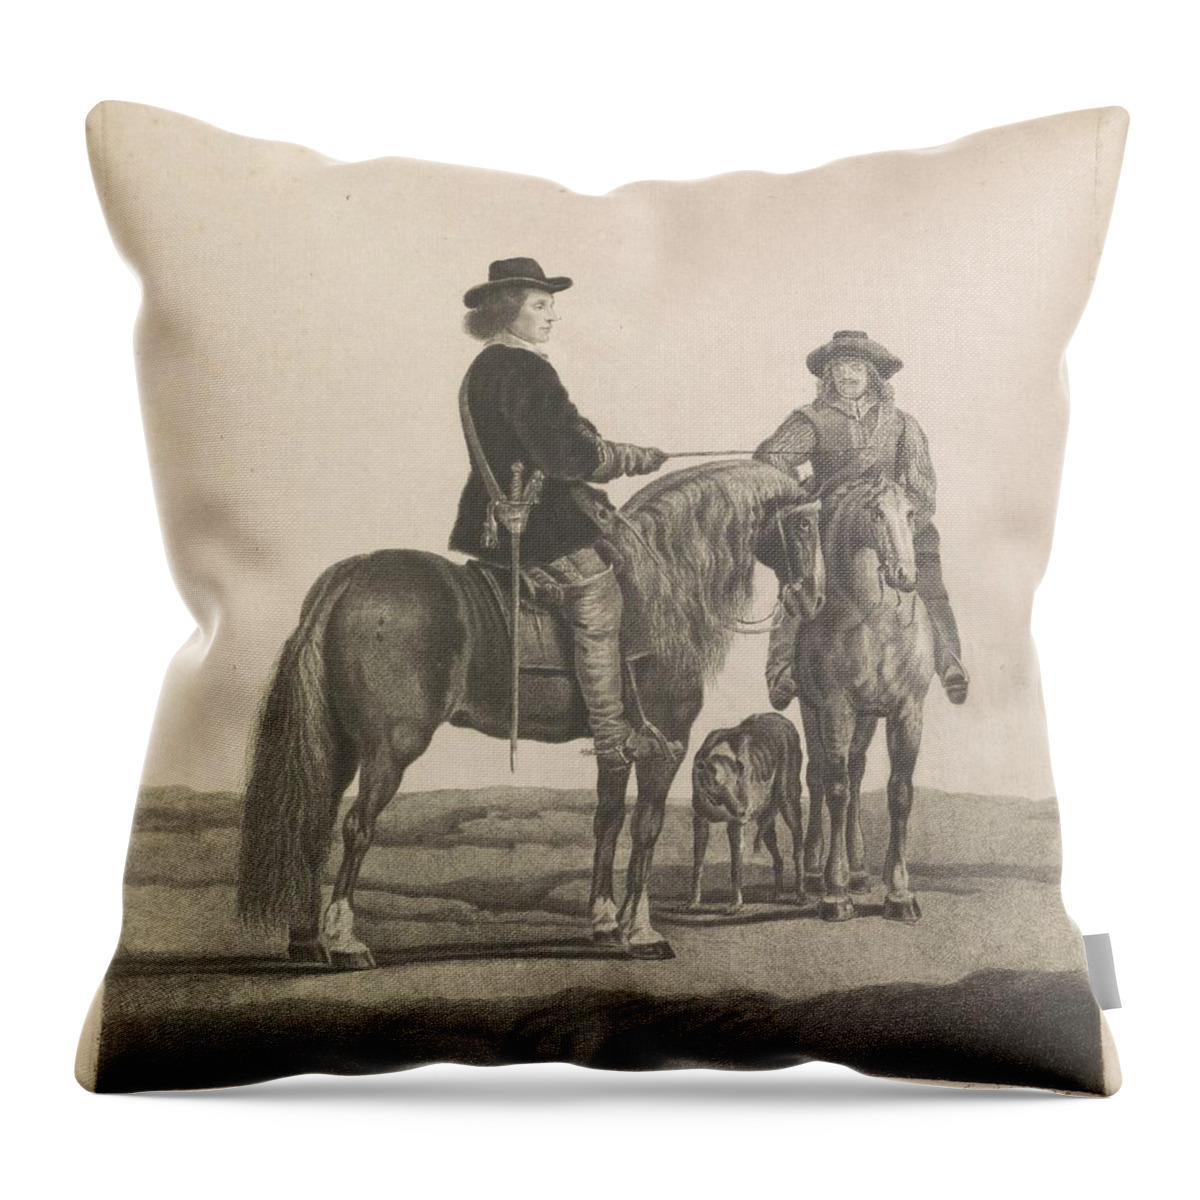 Vintage Throw Pillow featuring the painting Rider portrait of Willem II, Prince of Orange, William Baillie, after Gerard ter Borch by MotionAge Designs